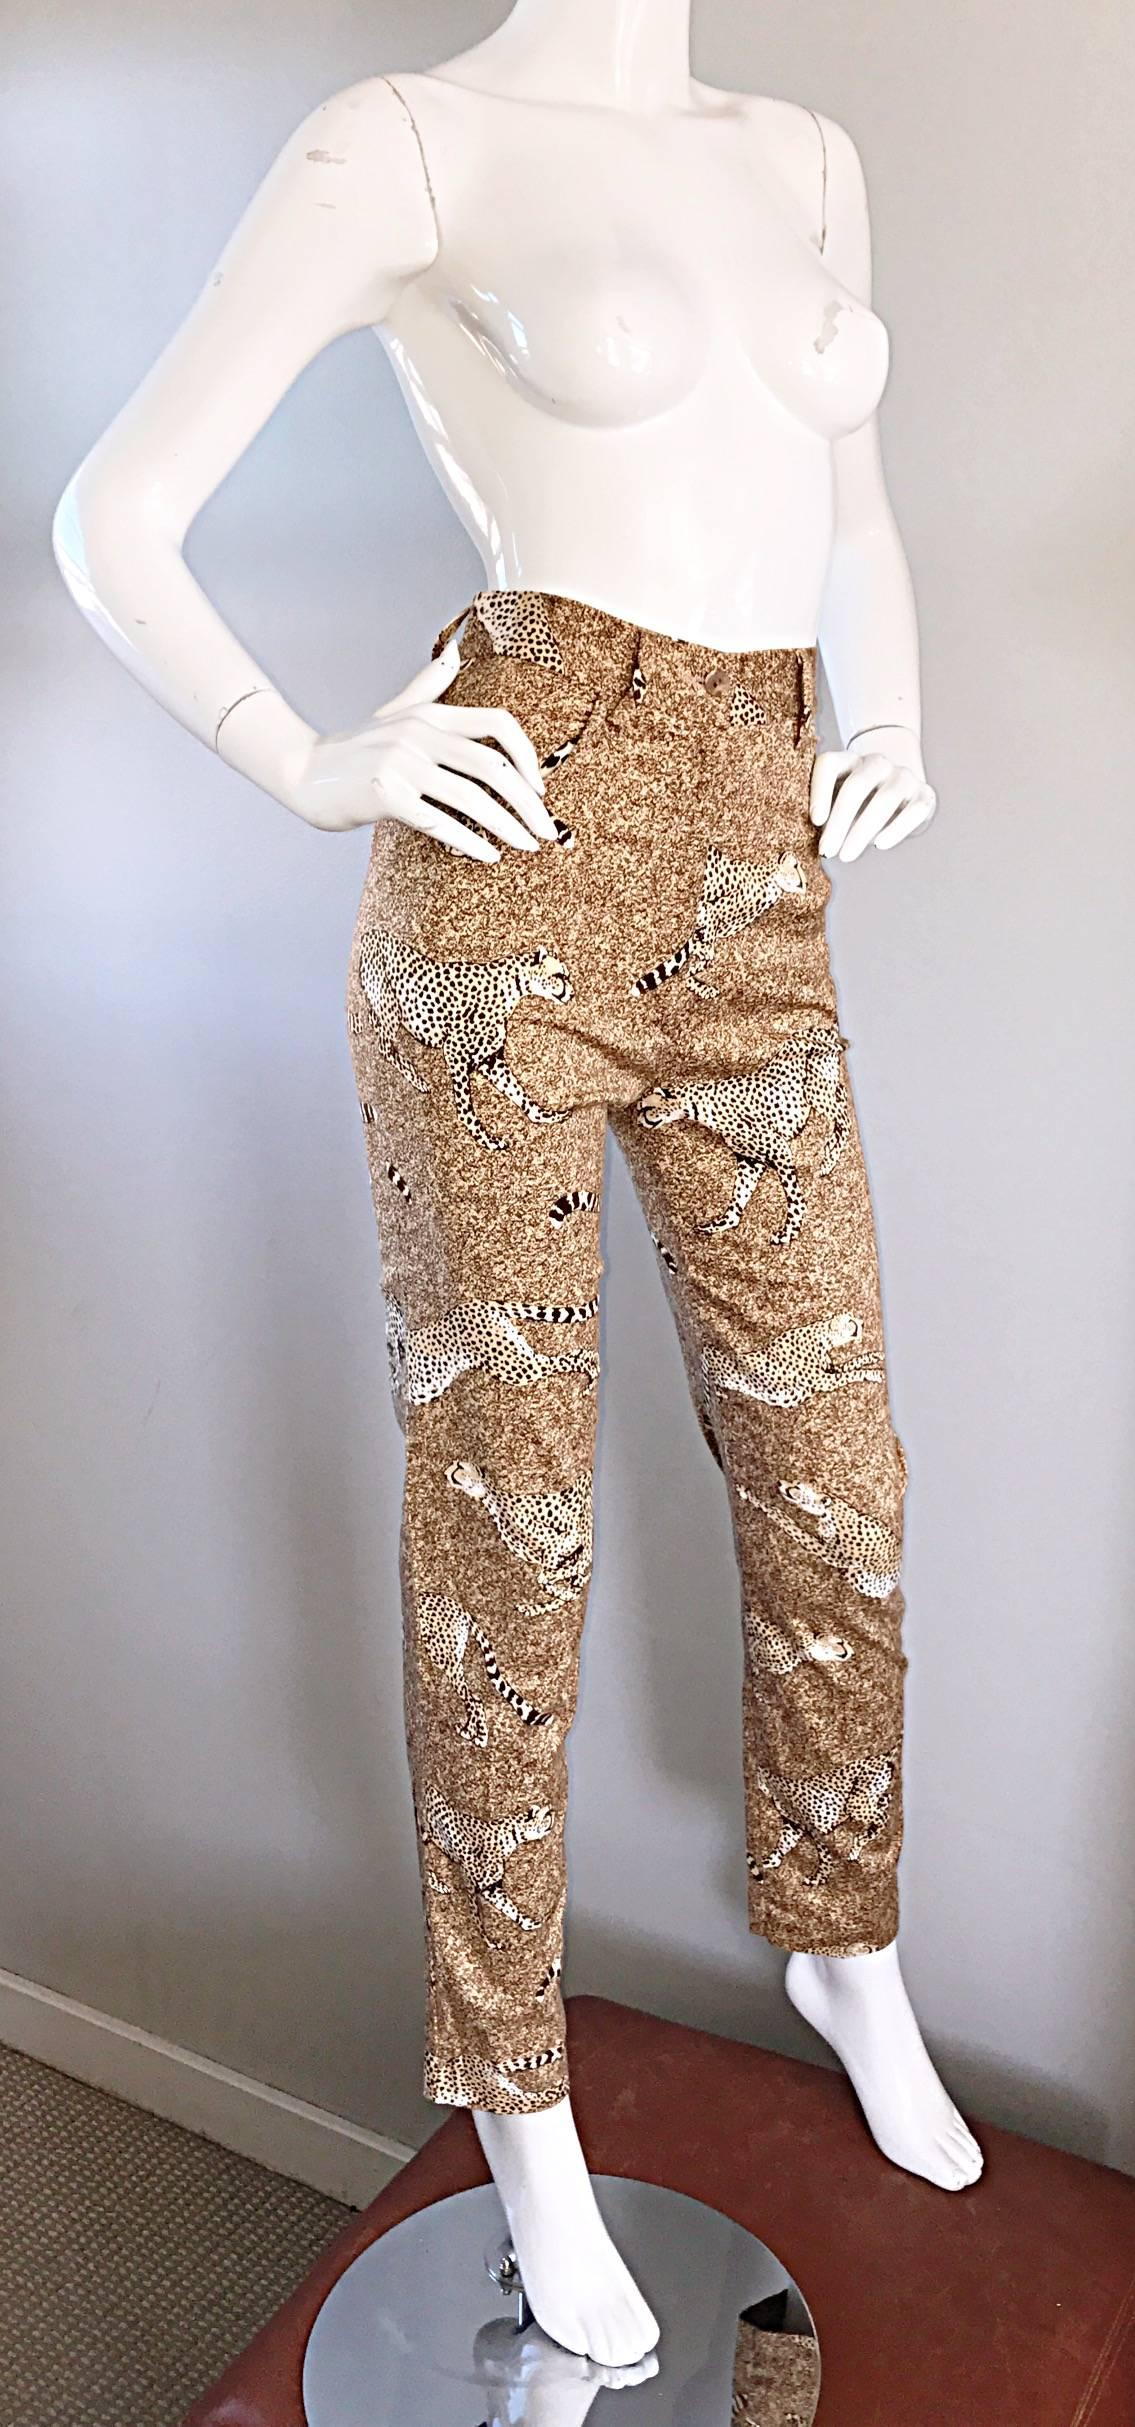 Rare 1990s Kenzo Jungle Cheetah Leopard Print High Waisted Slim Fit Pants Sz 38 In Excellent Condition For Sale In San Diego, CA